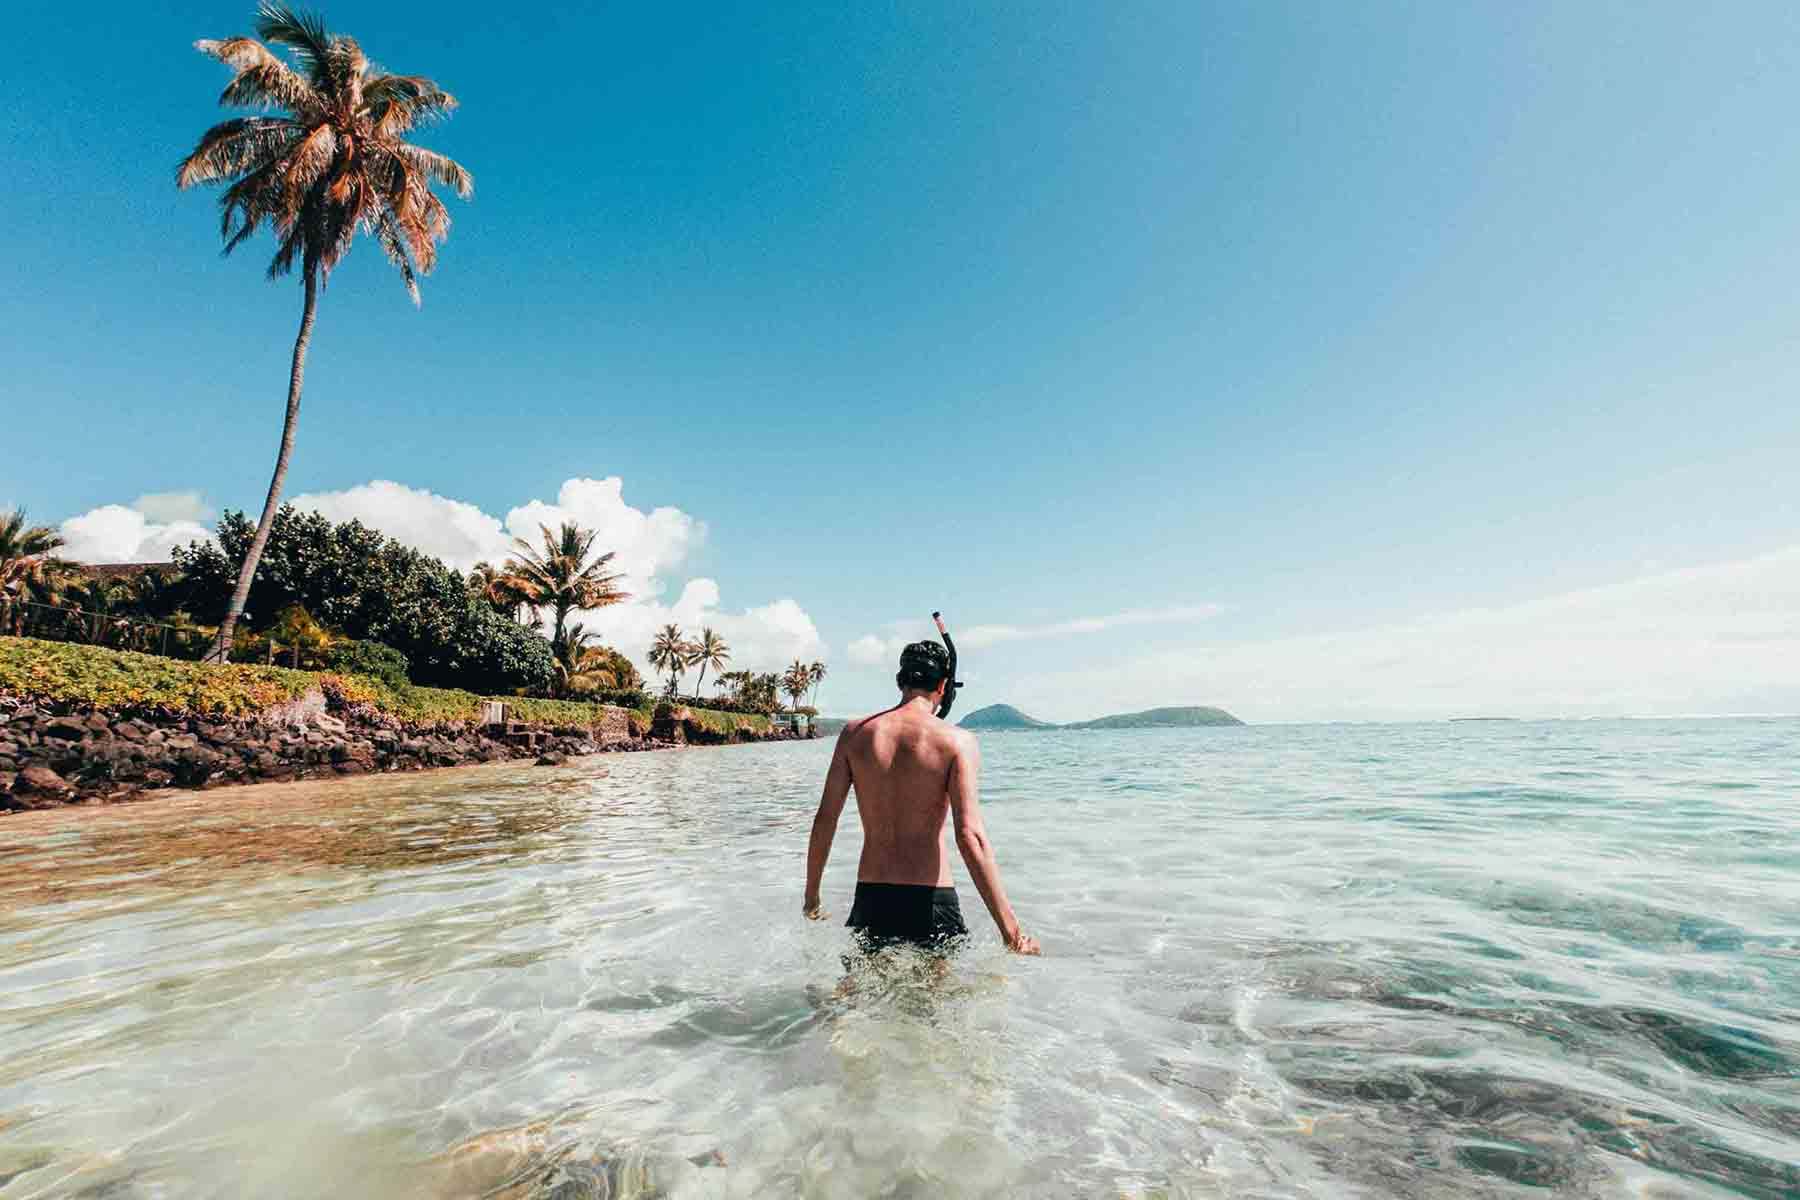 Man wading in shallow water wearing snorkle 